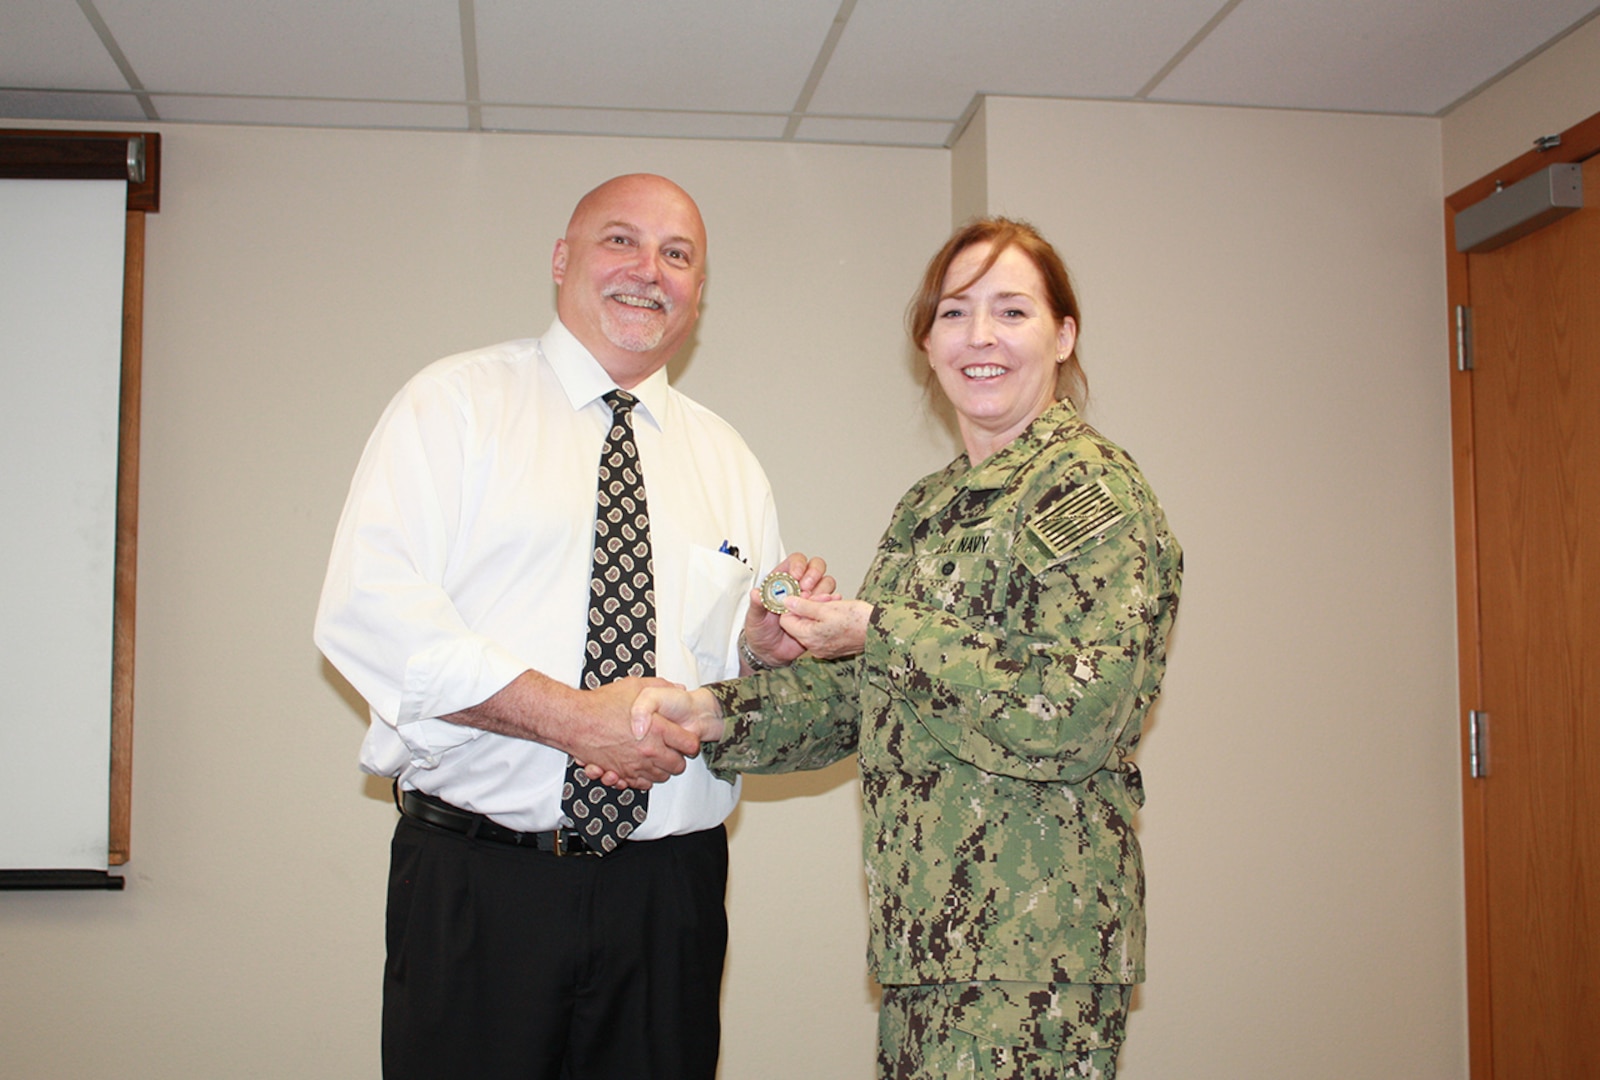 Defense Logistics Agency Land and Maritime Commander Navy Rear Adm. Michelle Skubic presents her commander’s coin for excellence to Brian Mueller during a July 10 site visit and review at DLA Maritime at Puget Sound Naval Shipyard in Bremerton, Wash. Mueller serves as deputy director of DLA Maritime at Puget Sound.